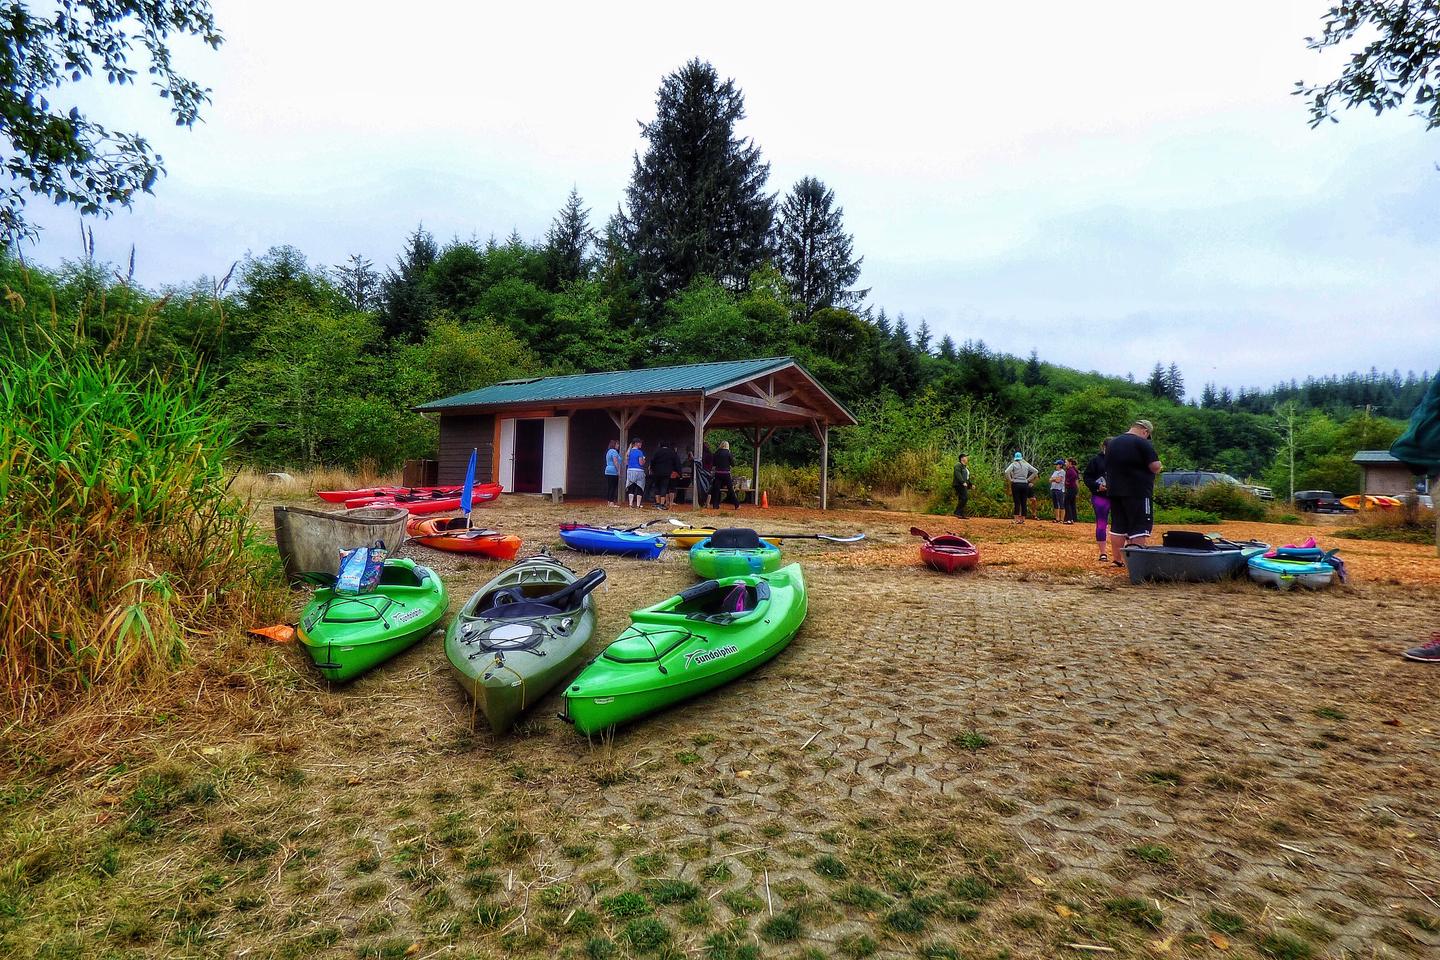 Assorted kayaks on the ground waiting to launch. Picnic shelter and parking lot in the background.Netul Landing kayak launch